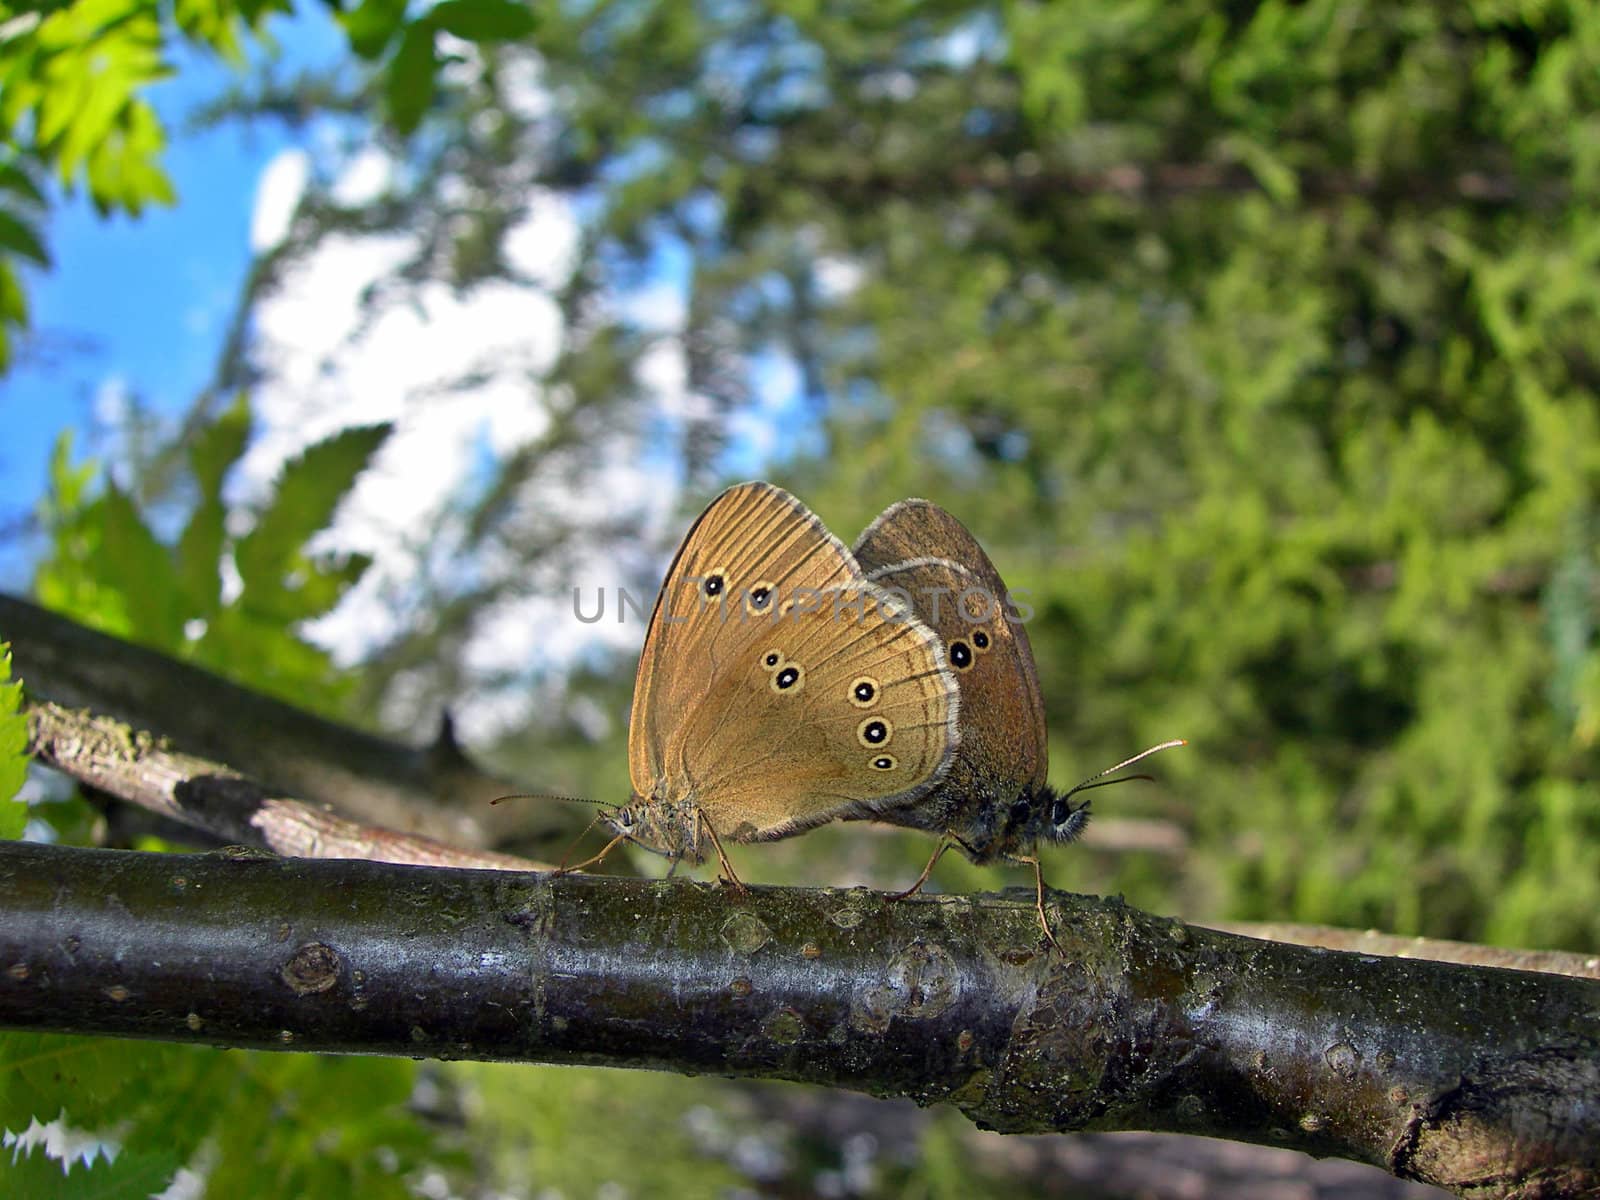 Two butterflies mating on the branch